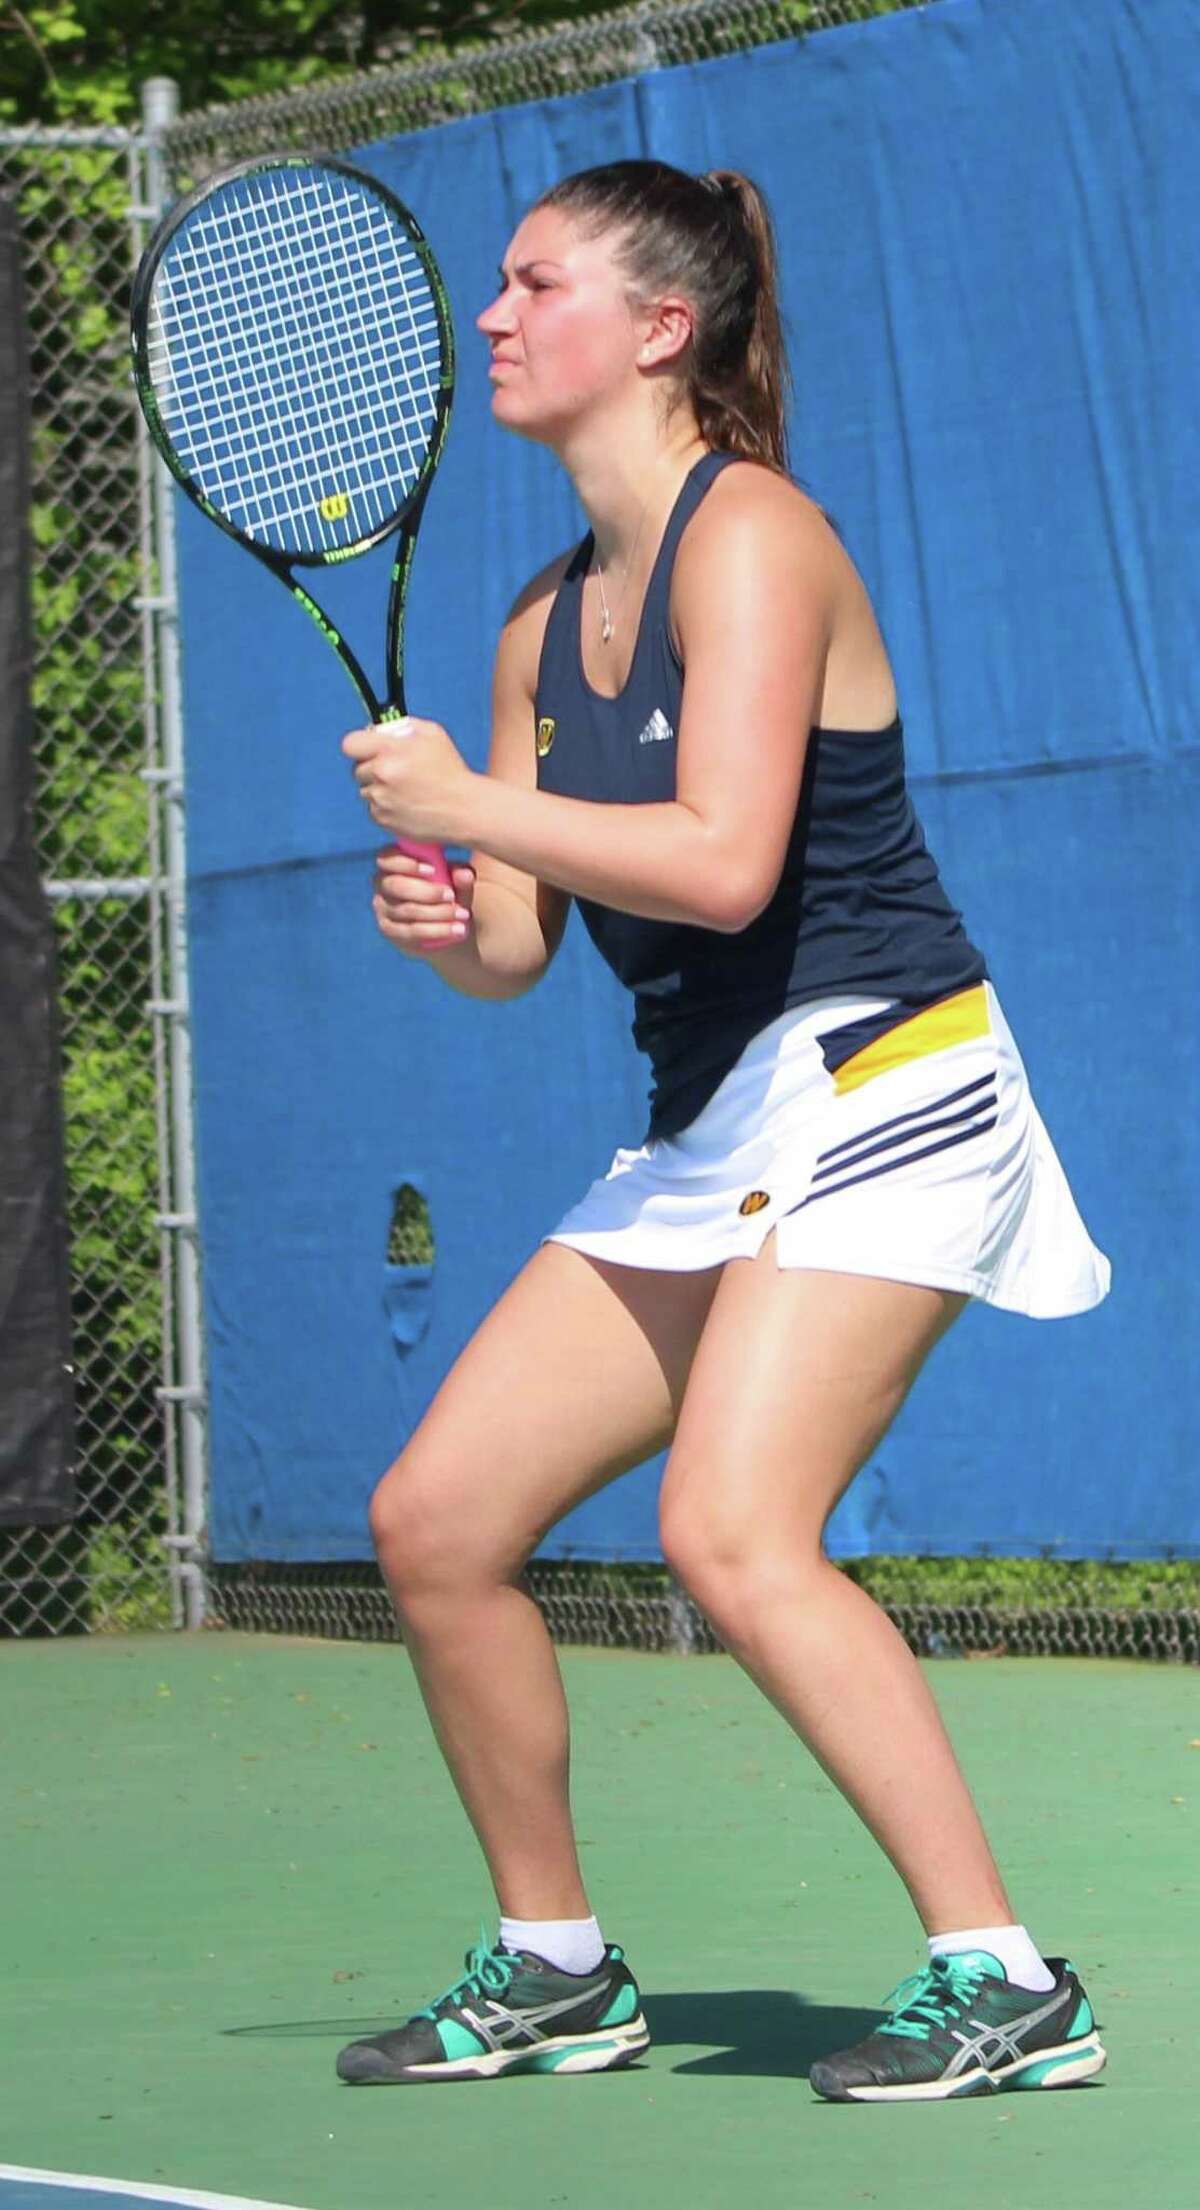 Weston's Cayla Koch won in straight sets at No. 1 singles to help lead the Trojans to victory over Barlow in the South-West Conference girls tennis team final at Weston High School May 17, 2017.